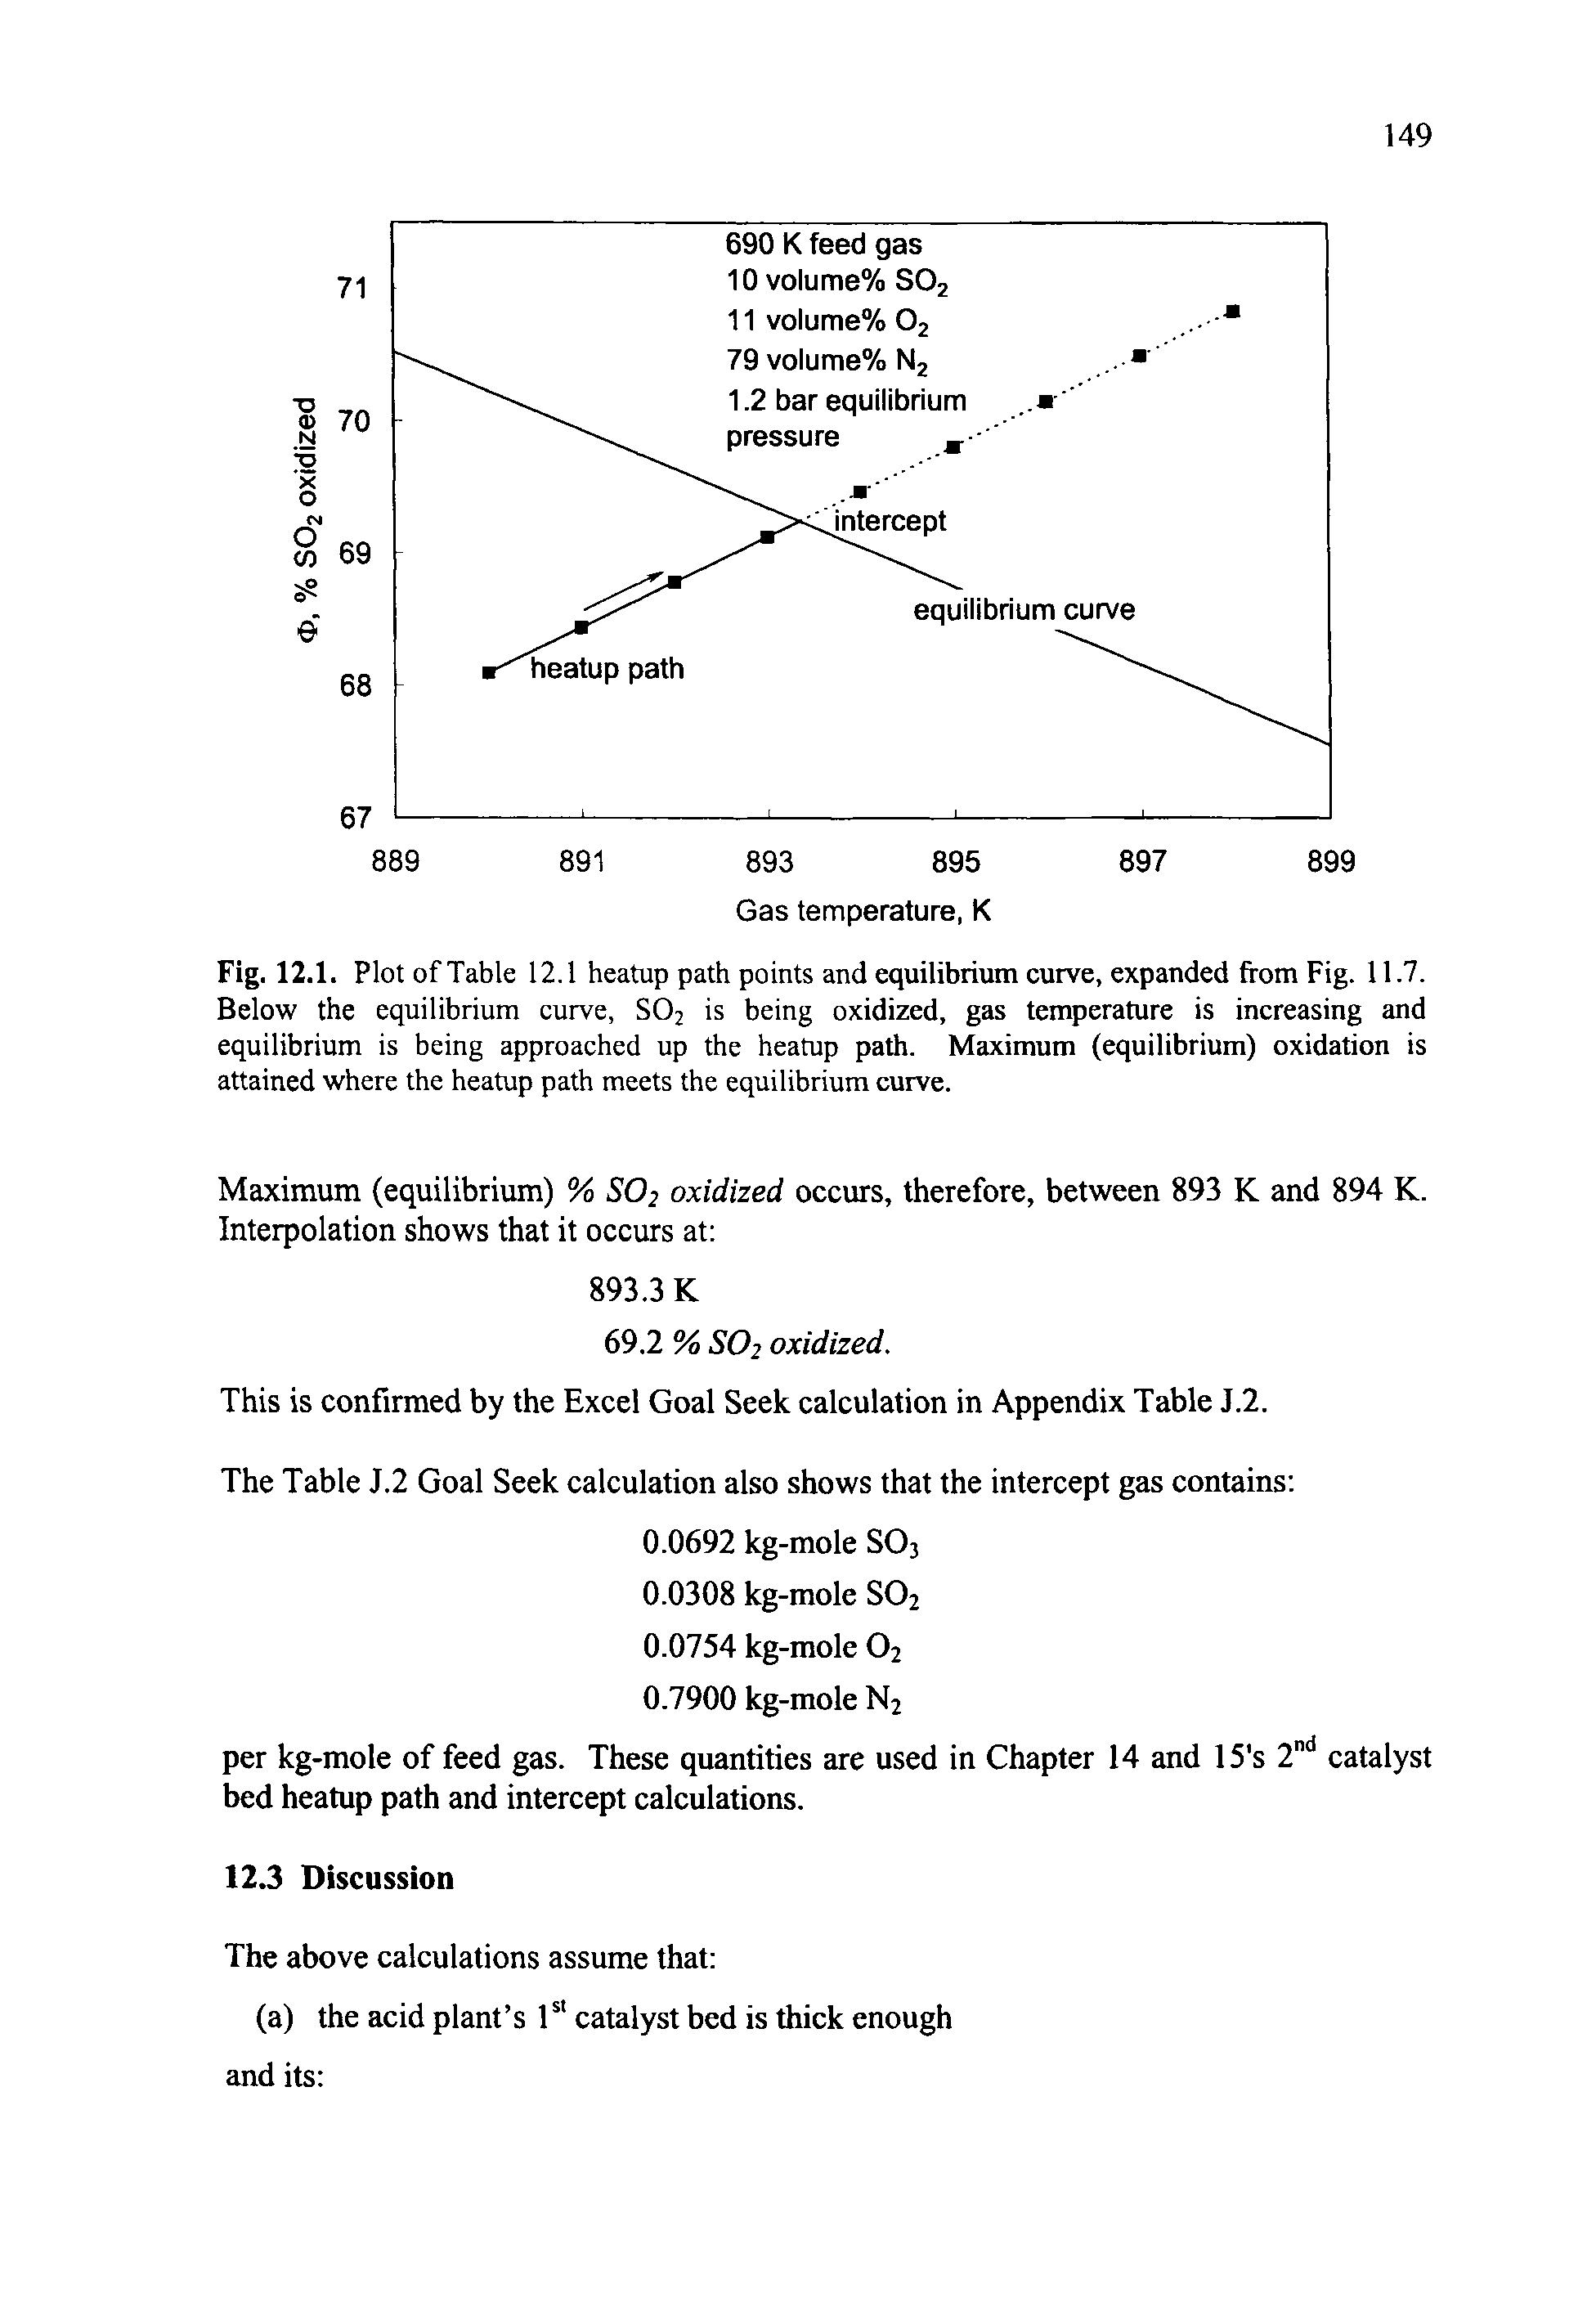 Fig. 12.1. Plot of Table 12.1 heatup path points and equilibrium curve, expanded from Fig. 11.7. Below the equilibrium curve, S02 is being oxidized, gas temperature is increasing and equilibrium is being approached up the heatup path. Maximum (equilibrium) oxidation is attained where the heatup path meets the equilibrium curve.